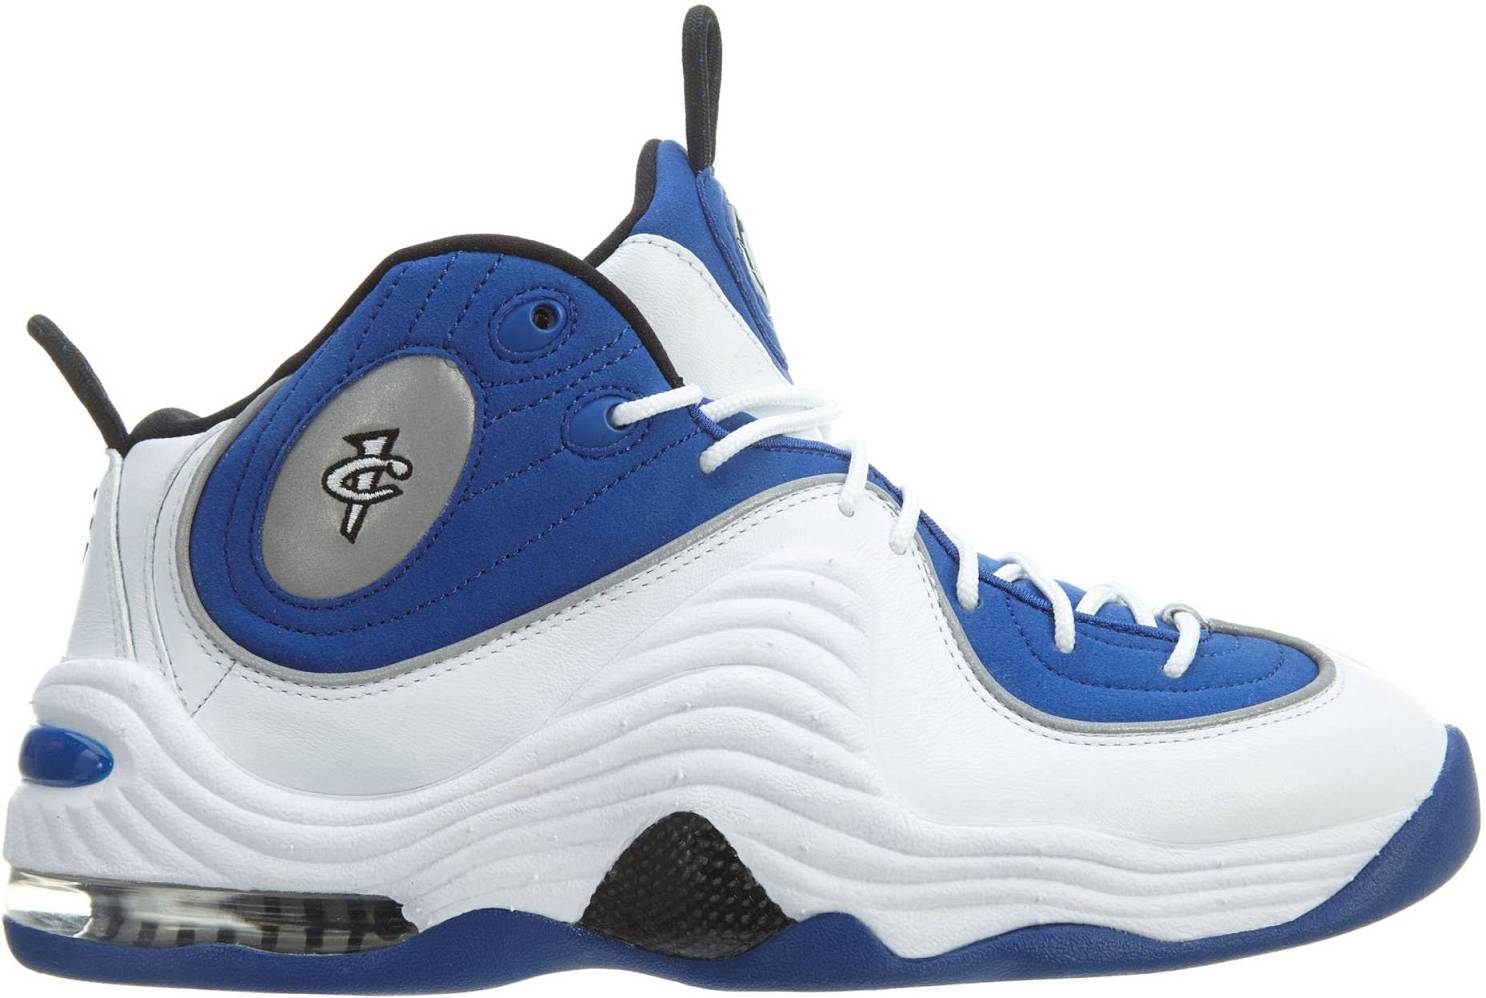 Nike Air Penny II Shoes Reviews & Reasons To Buy